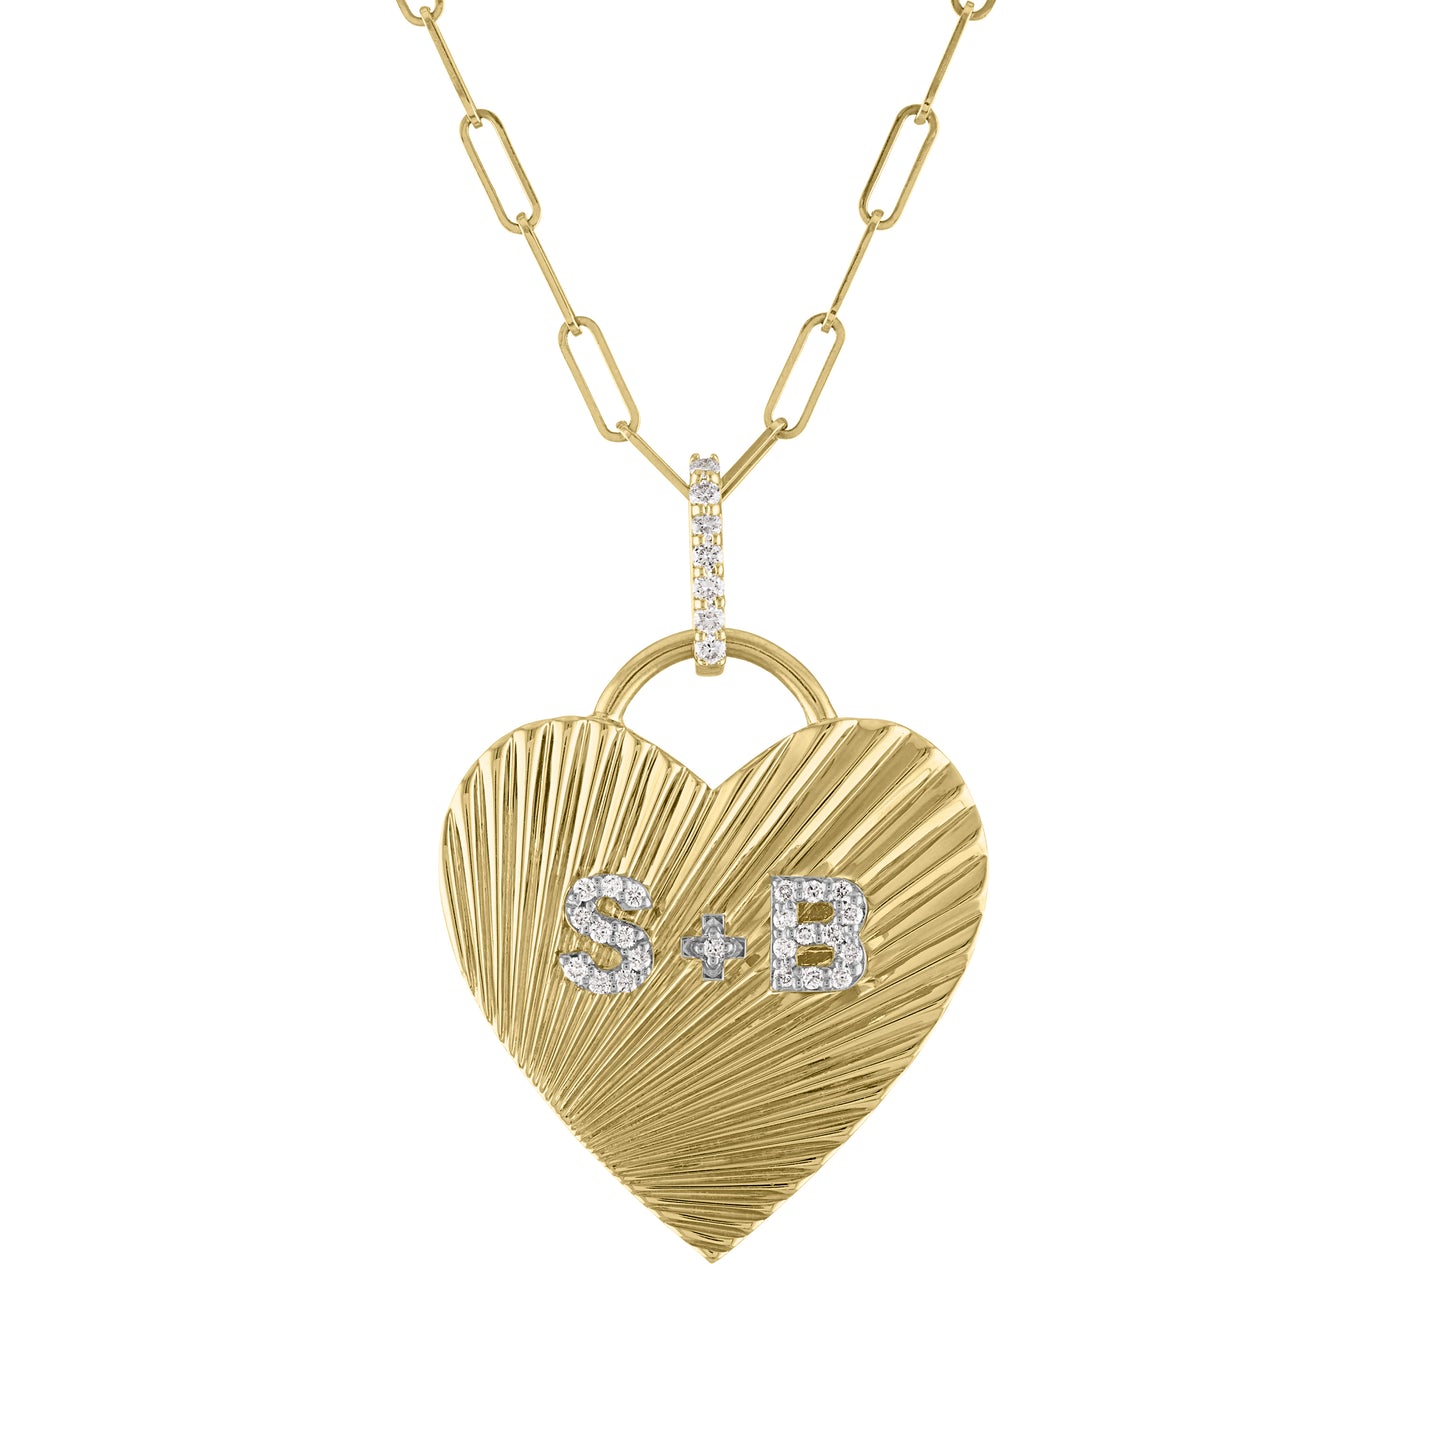 Yellow gold fluted heart charm with diamond initials, a diamond bail and a paperclip chain.